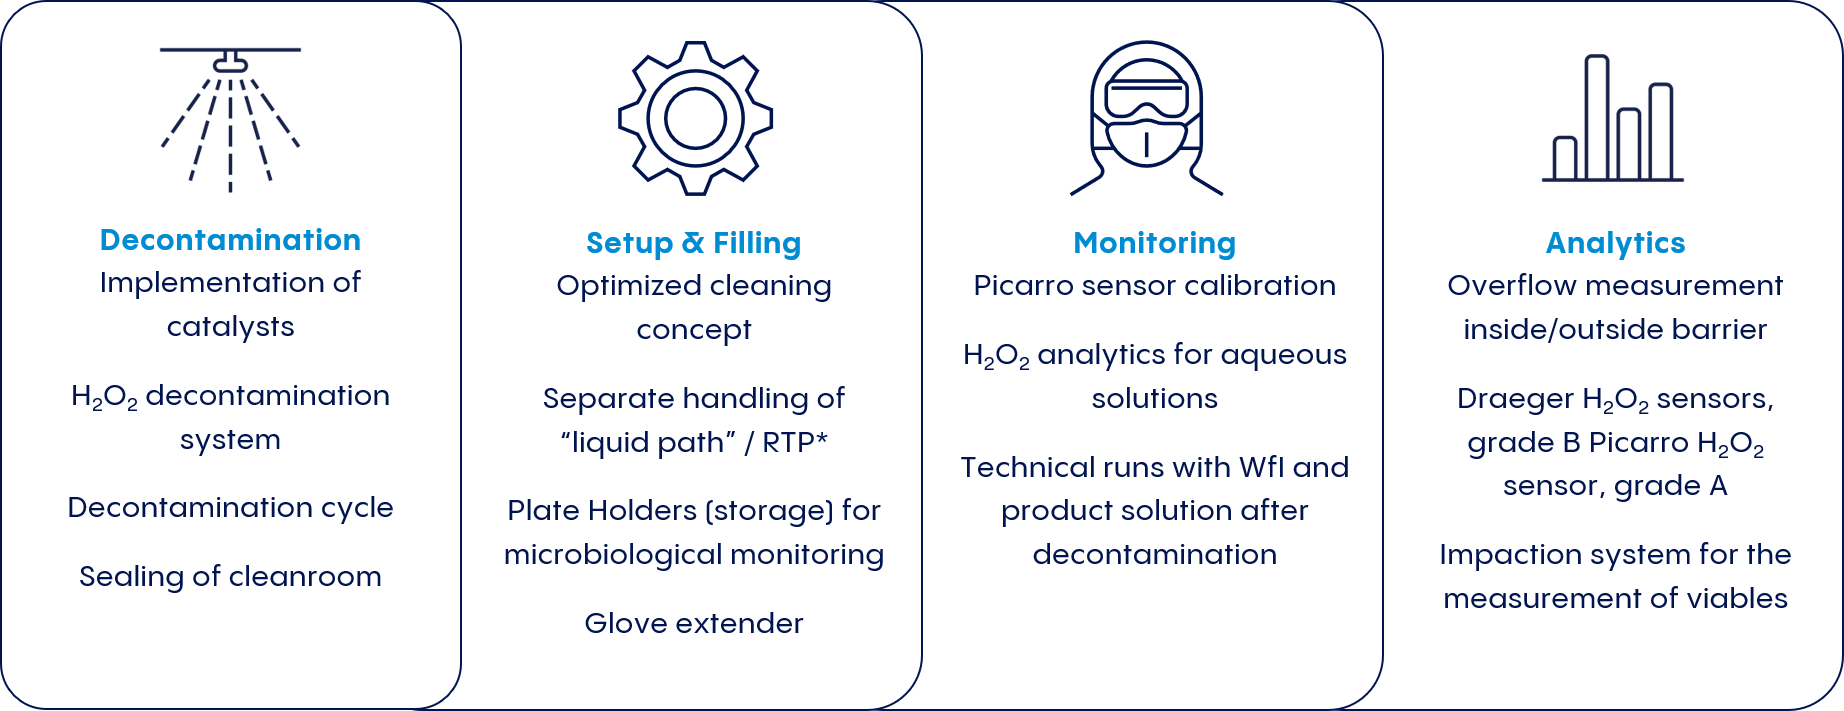 A holistic cleanroom concept considers all working steps around aseptic filling.